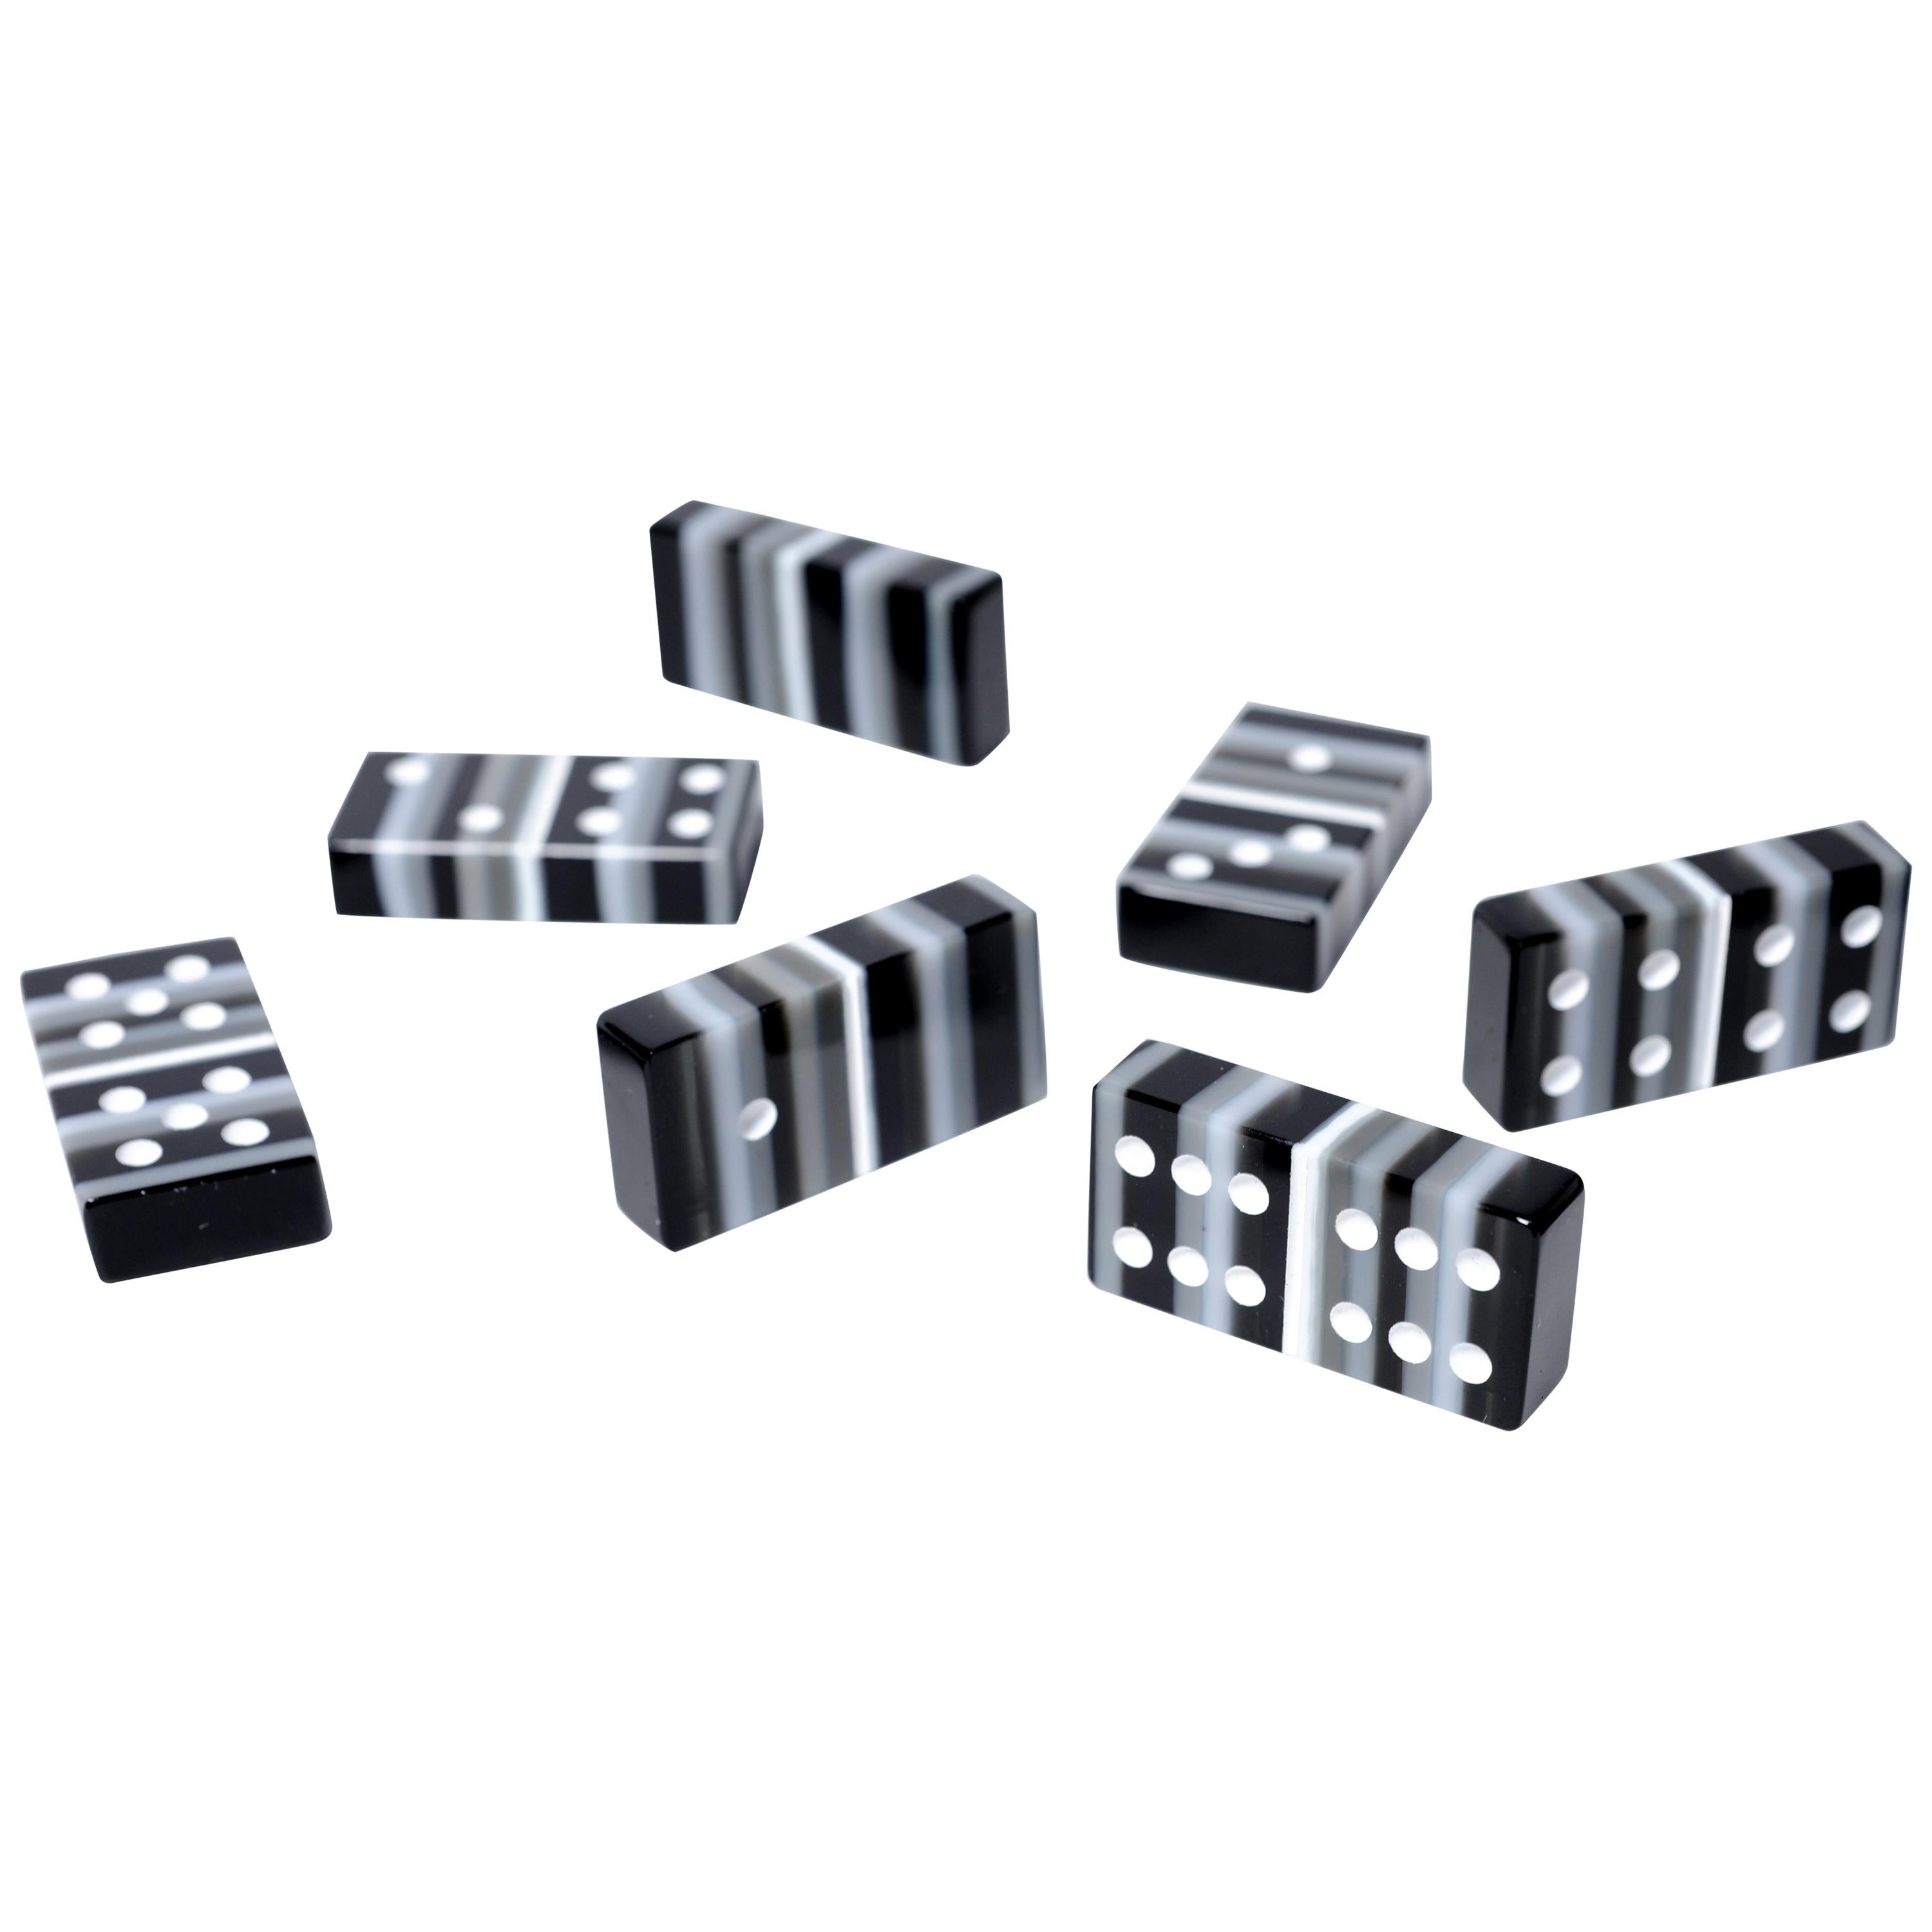 Black and White Art Glass Domino Barcode Collection with Wood Case